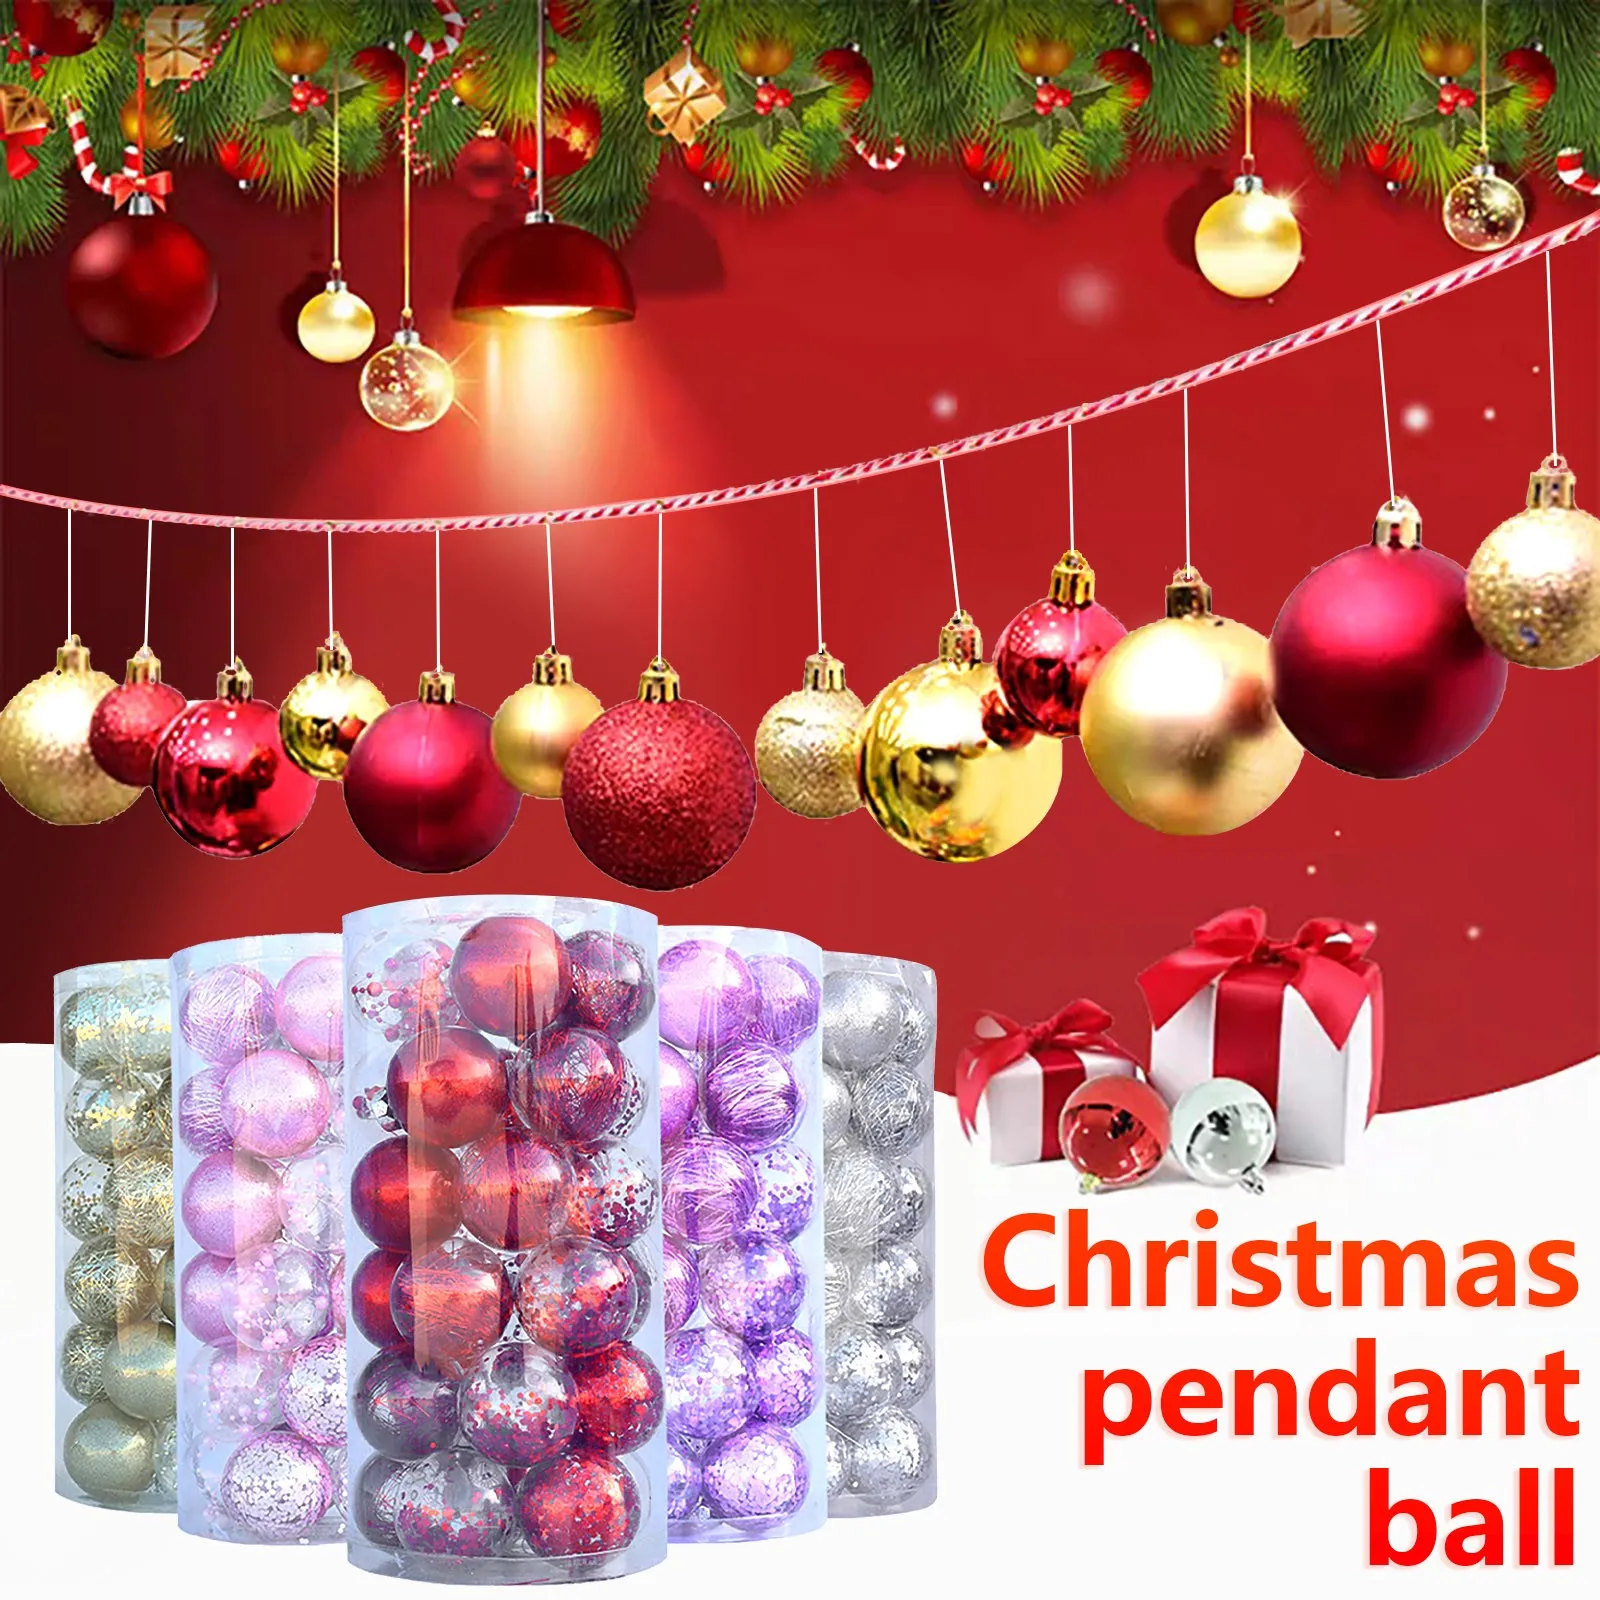 Personalised from Our House to Yours Christmas Hanging Bauble DIY Xmas Tree Balls Ornaments Home Party Decor Christmas Decor Gift for Home New Year Red Gold Ball 3 Inches